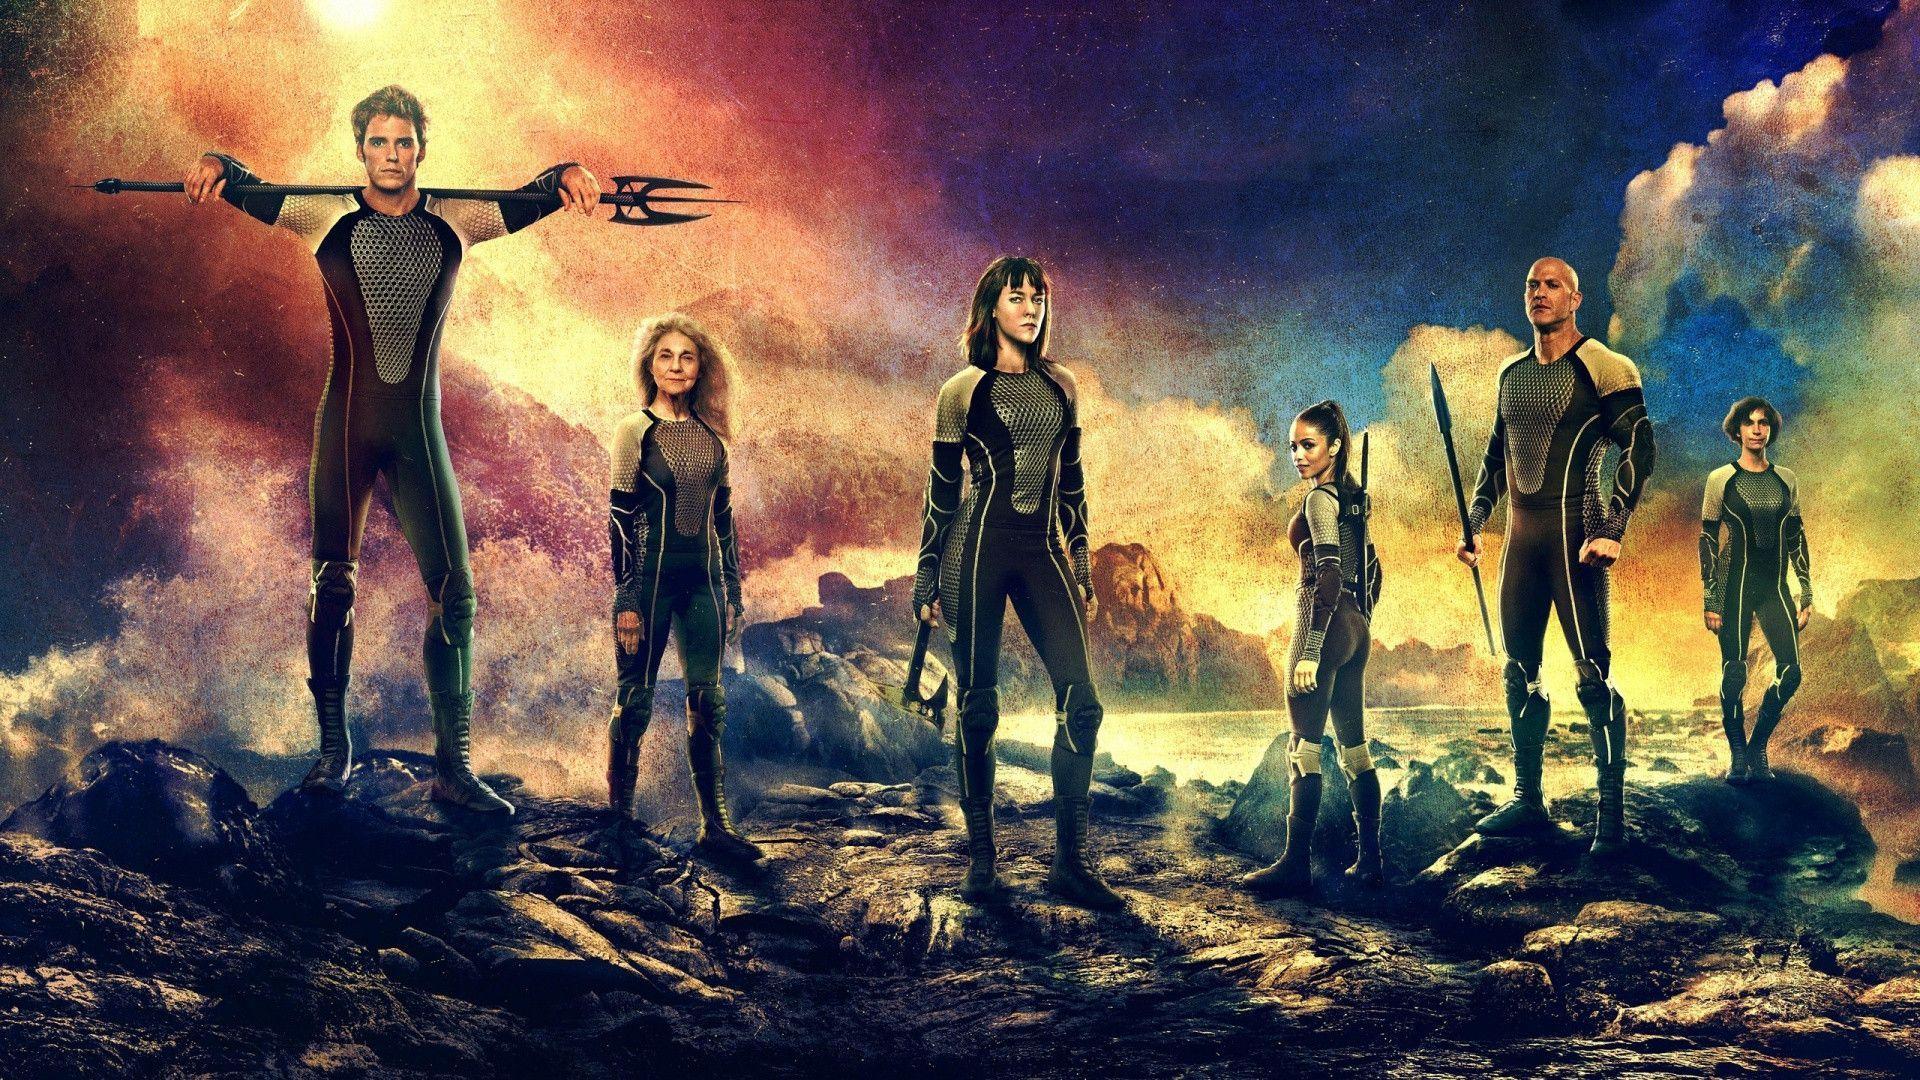 The Hunger Games: Catching Fire Wallpaper. The Hunger Games